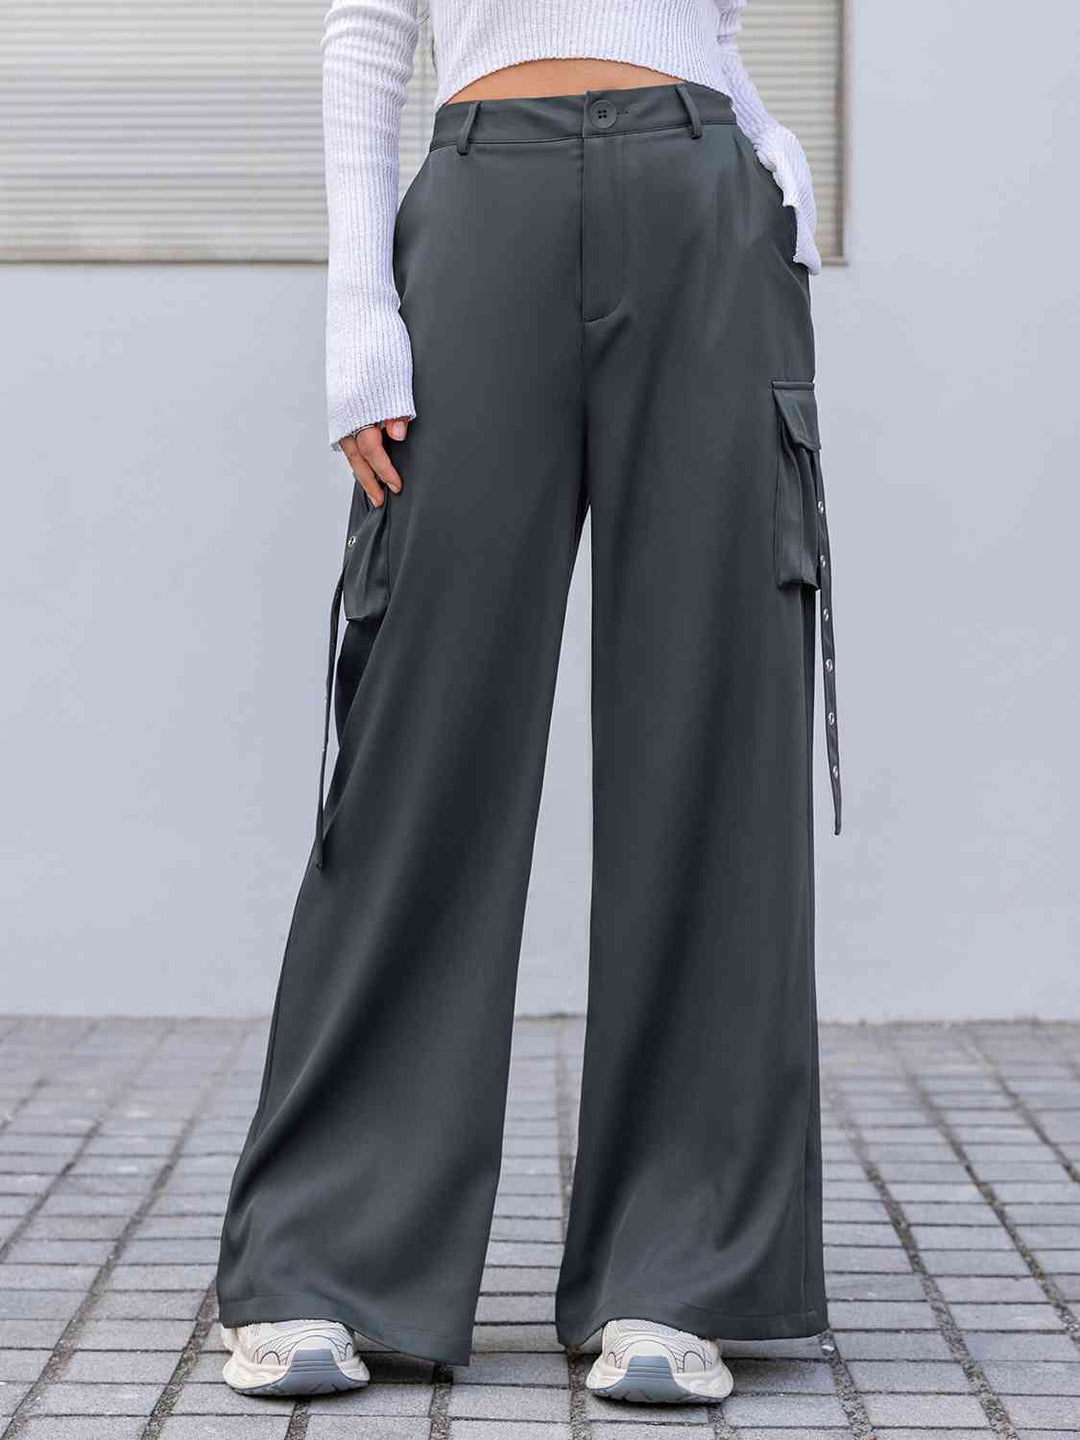 Wide Leg Cargo Pants - Pants - Wild Willows Boutique - Massapequa, NY, affordable and fashionable clothing for women of all ages. Bottoms, tops, dresses, intimates, outerwear, sweater, shoes, accessories, jewelry, active wear, and more // Wild Willow Boutique.